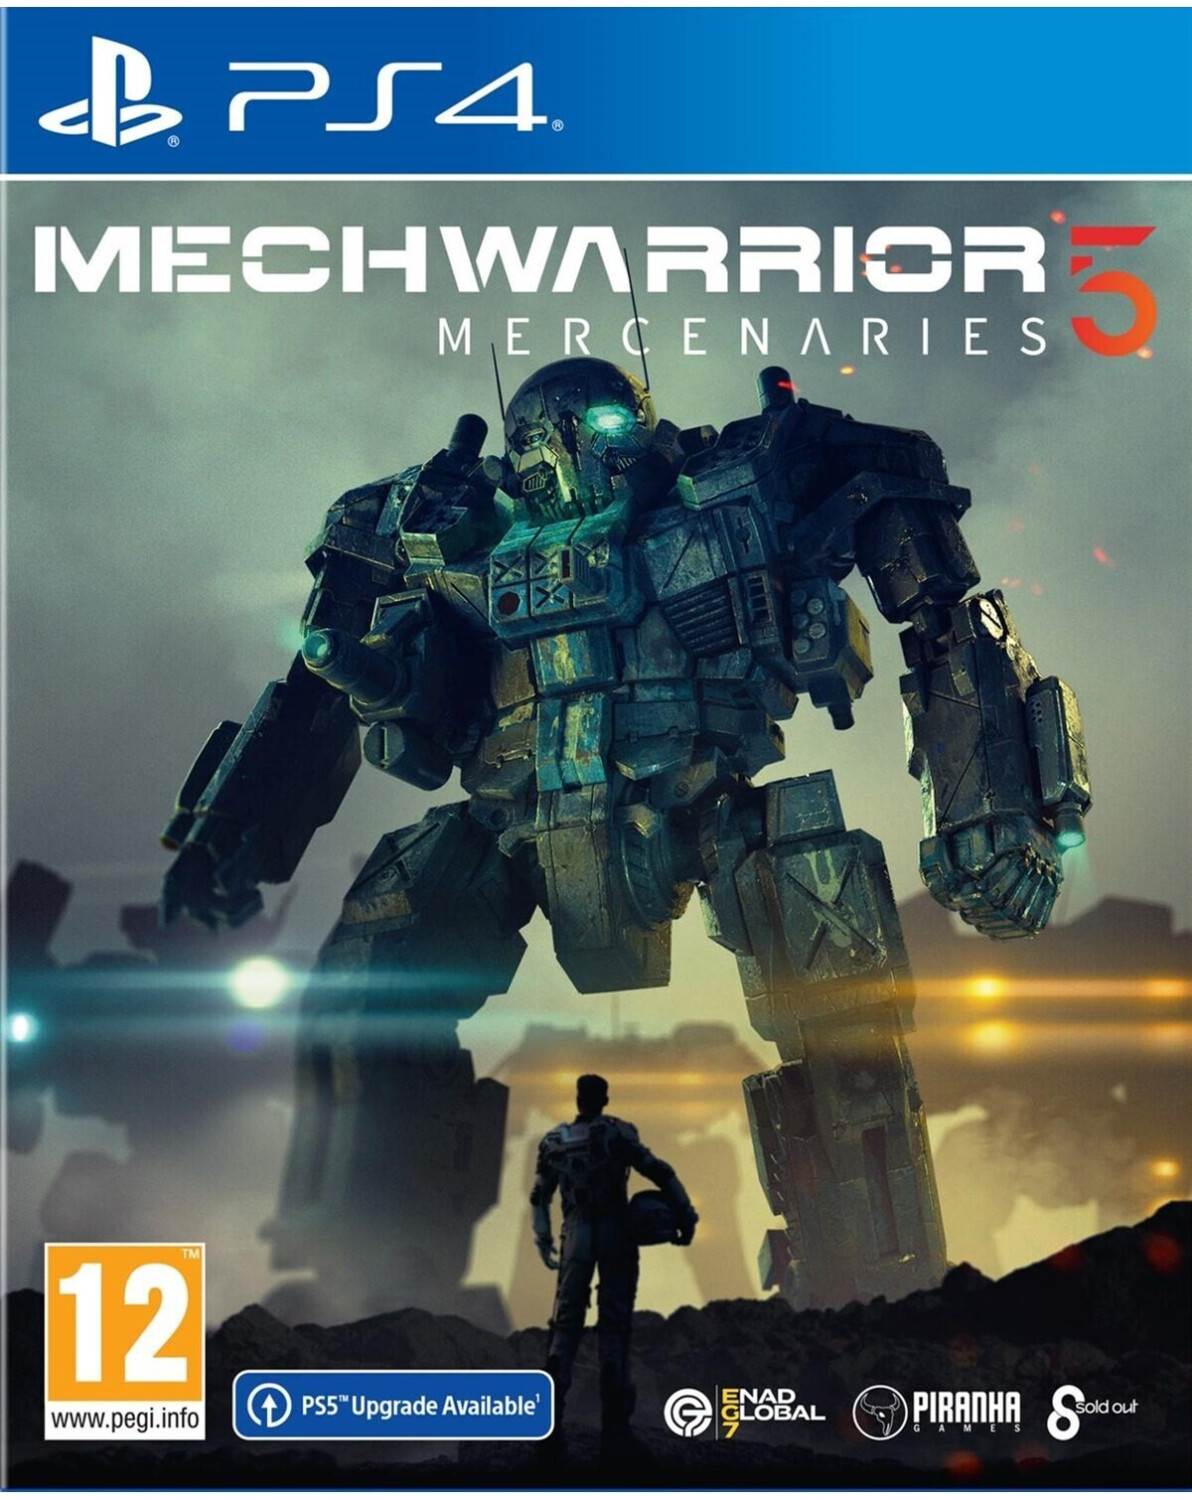 Photos - Game Sold Out MechWarrior 5: Mercenaries (PS4)